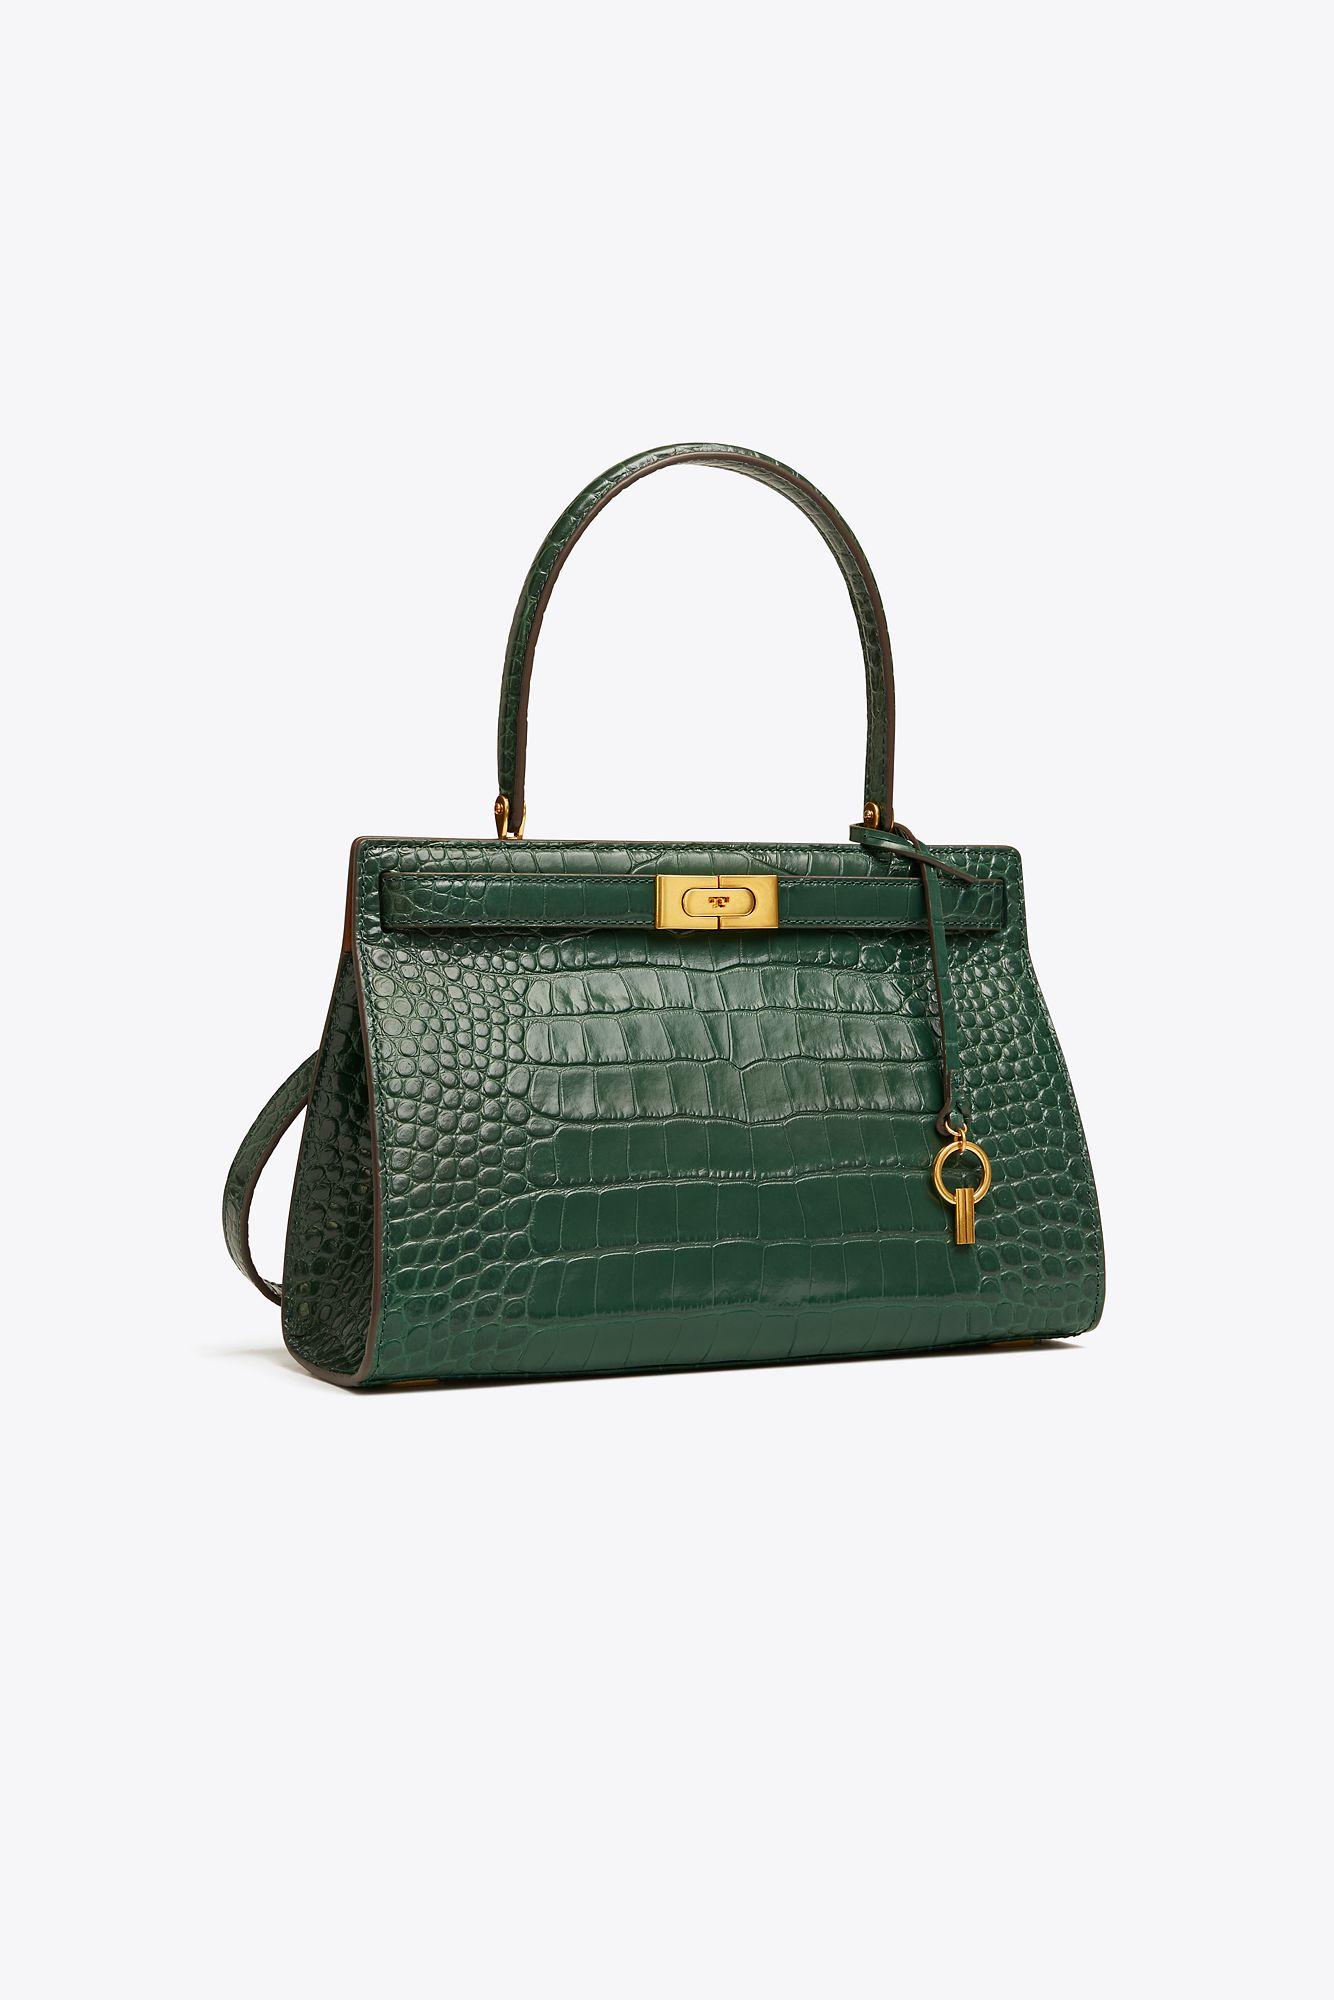 The Classic Yet Modern Eleanor And Lee Radziwill Bags